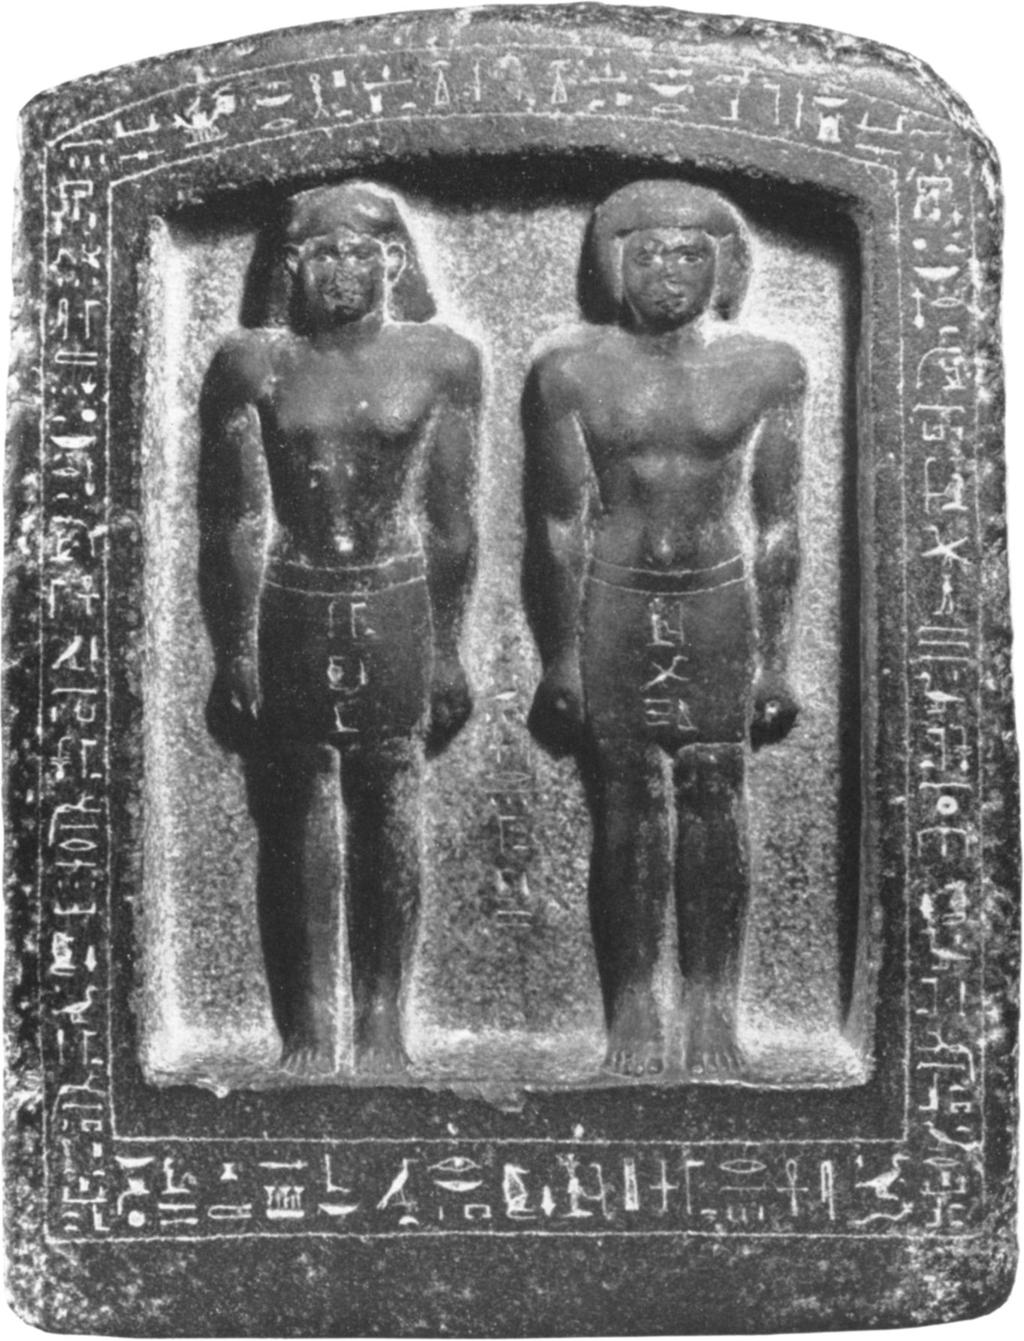 7 Naos stela, showing Pa-inmw and his father, It, from Memphis Dynasty XXVI, about 6oo00 BC Basalt, height 7554 inches 669967 The stela apparently comes from the temple of Ptah at Memphis, and it